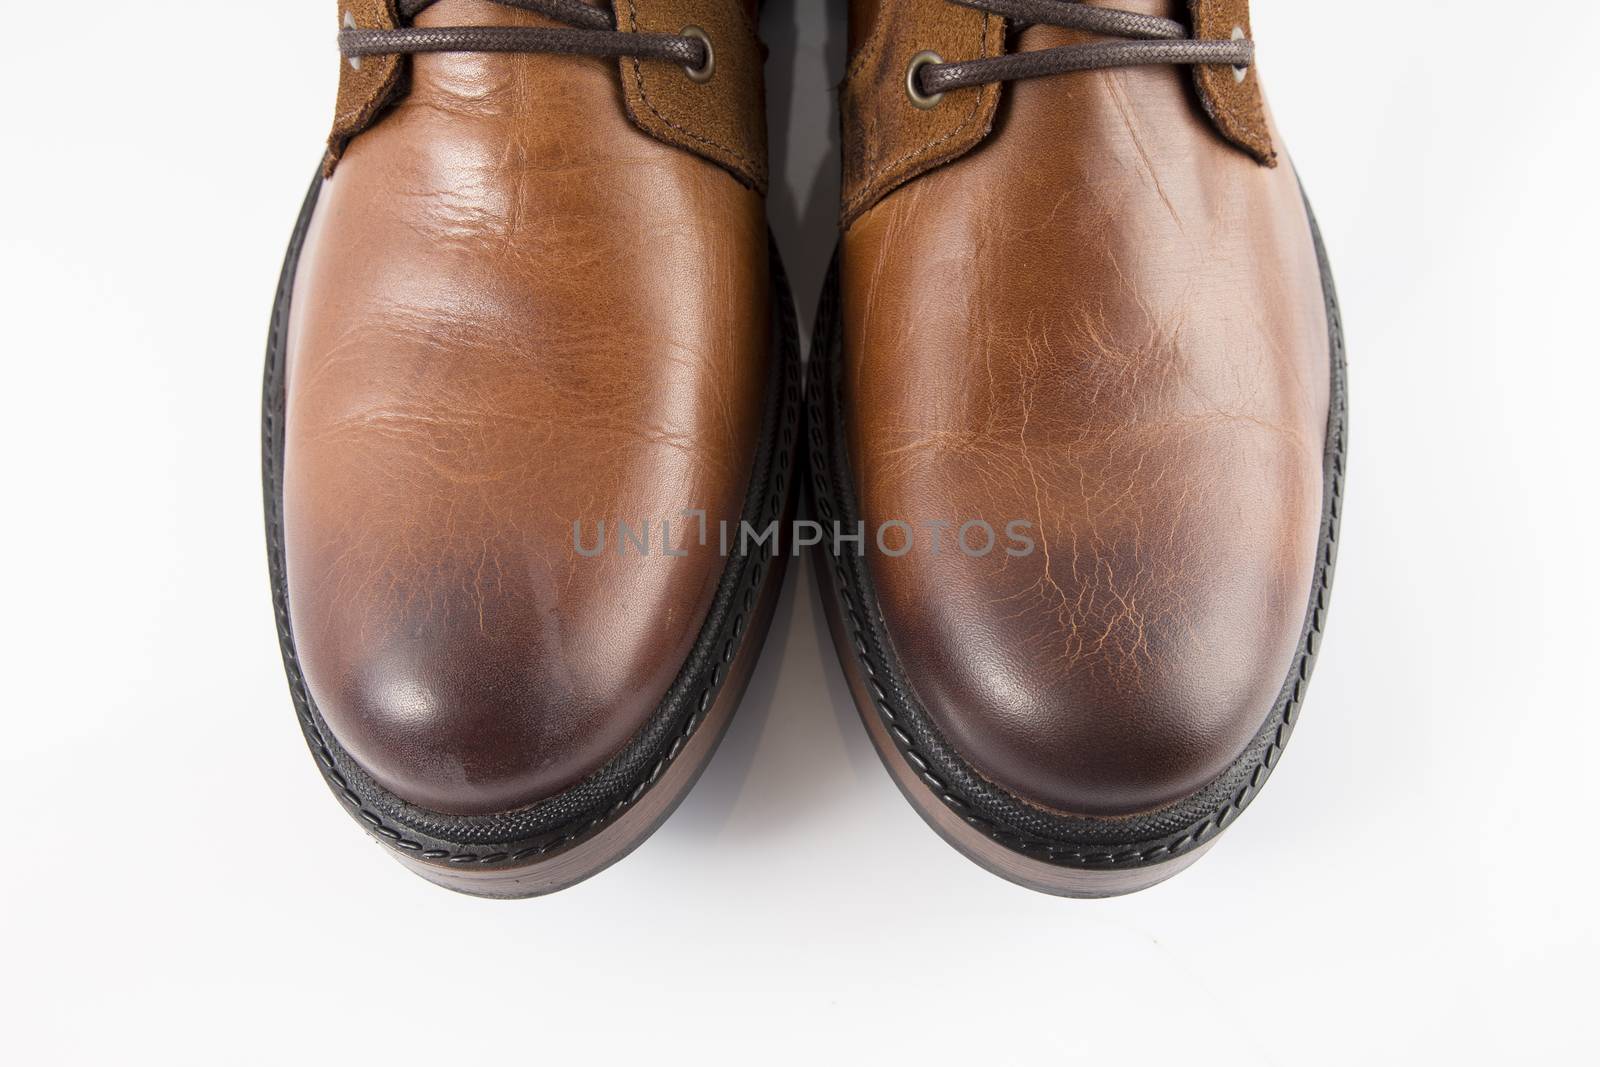 Pair of brown leather boots on white background, isolated product, top view. by GeorgeVieiraSilva